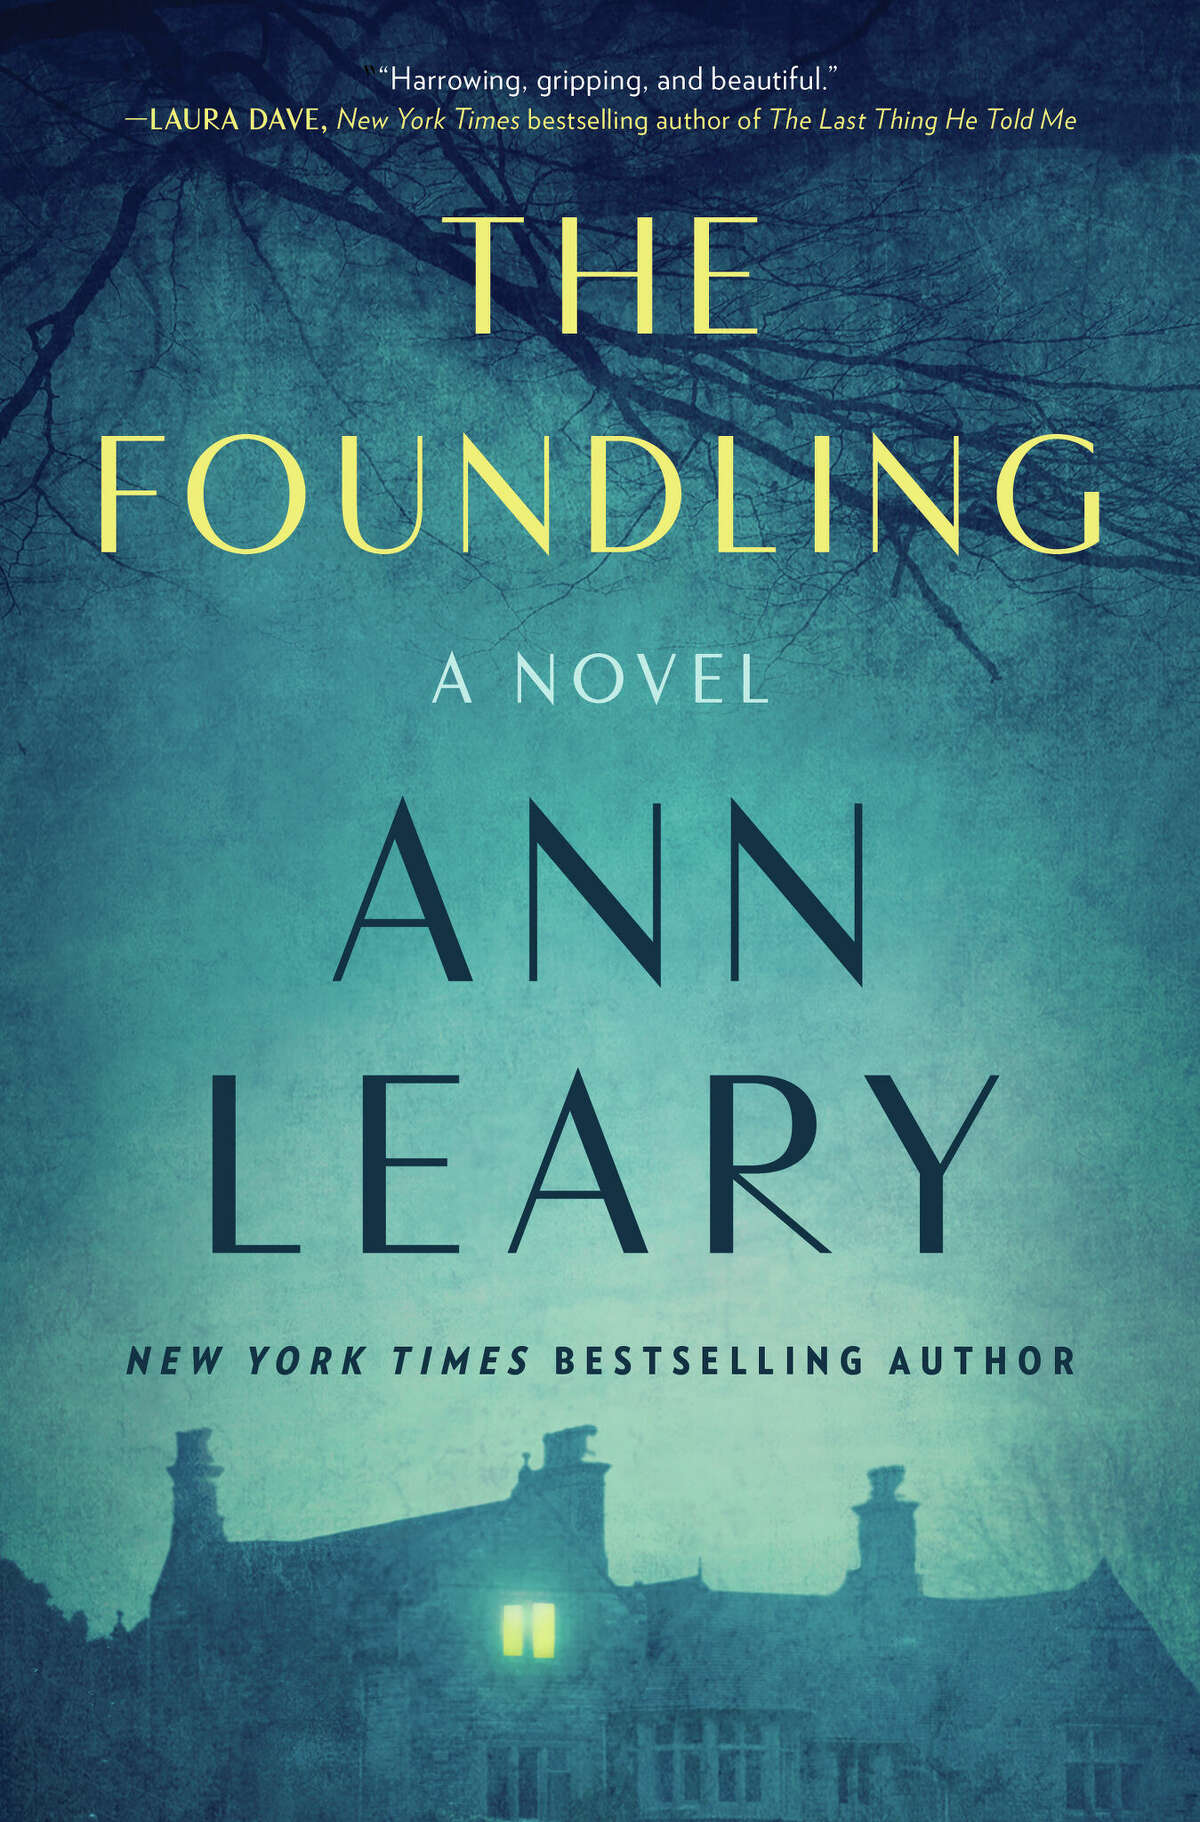 The cover of "The Foundling," the first historical fiction by Leary, a New York Times bestselling author. 